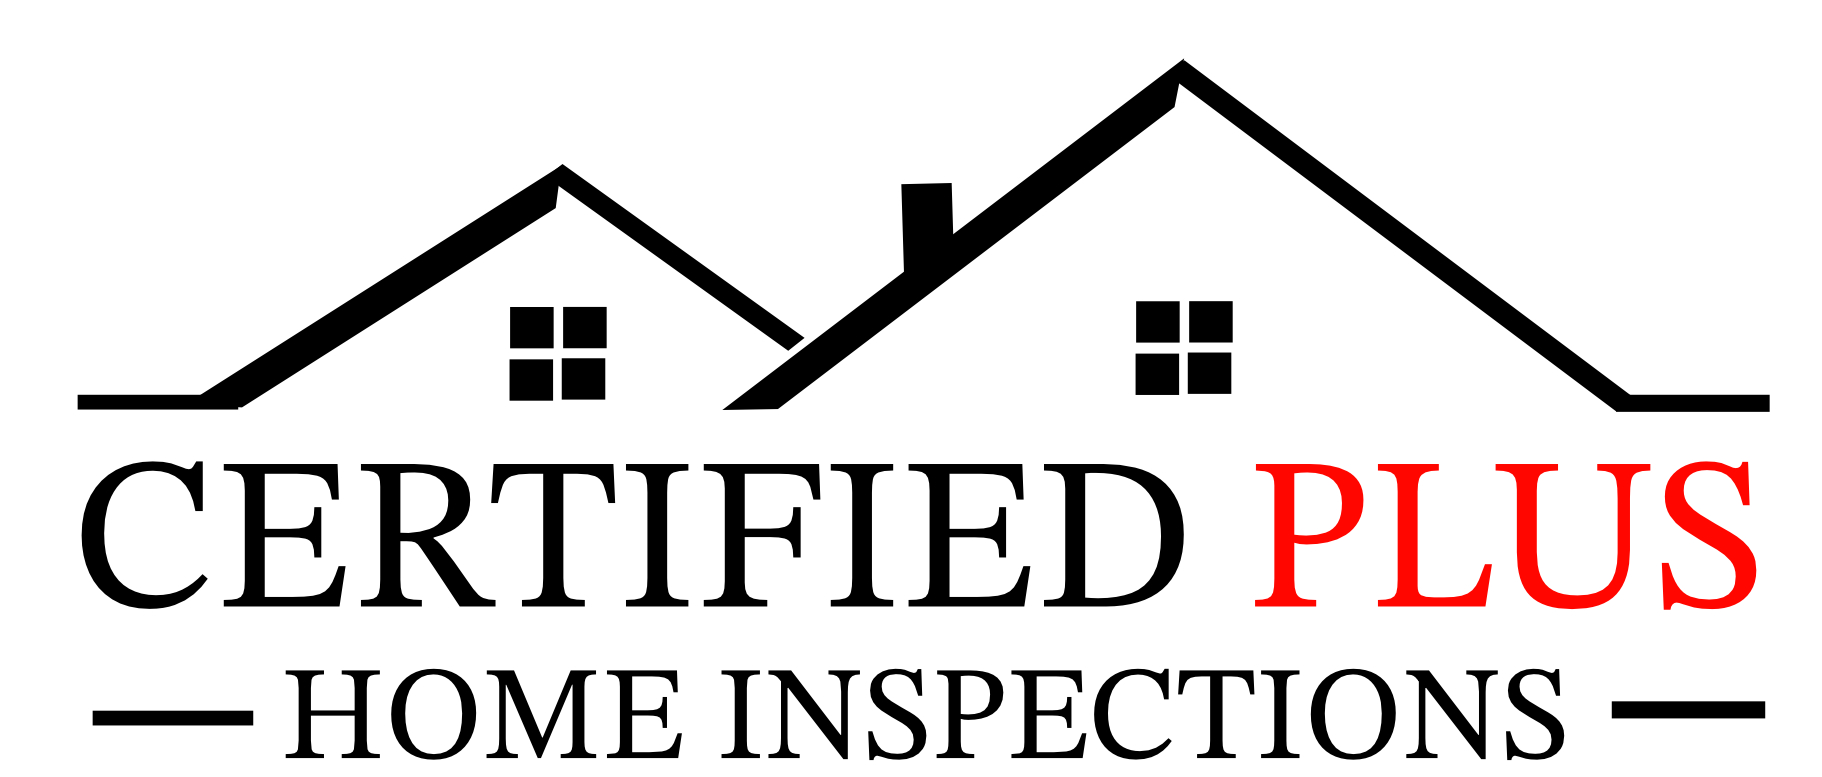 Certified Plus Home Inspections